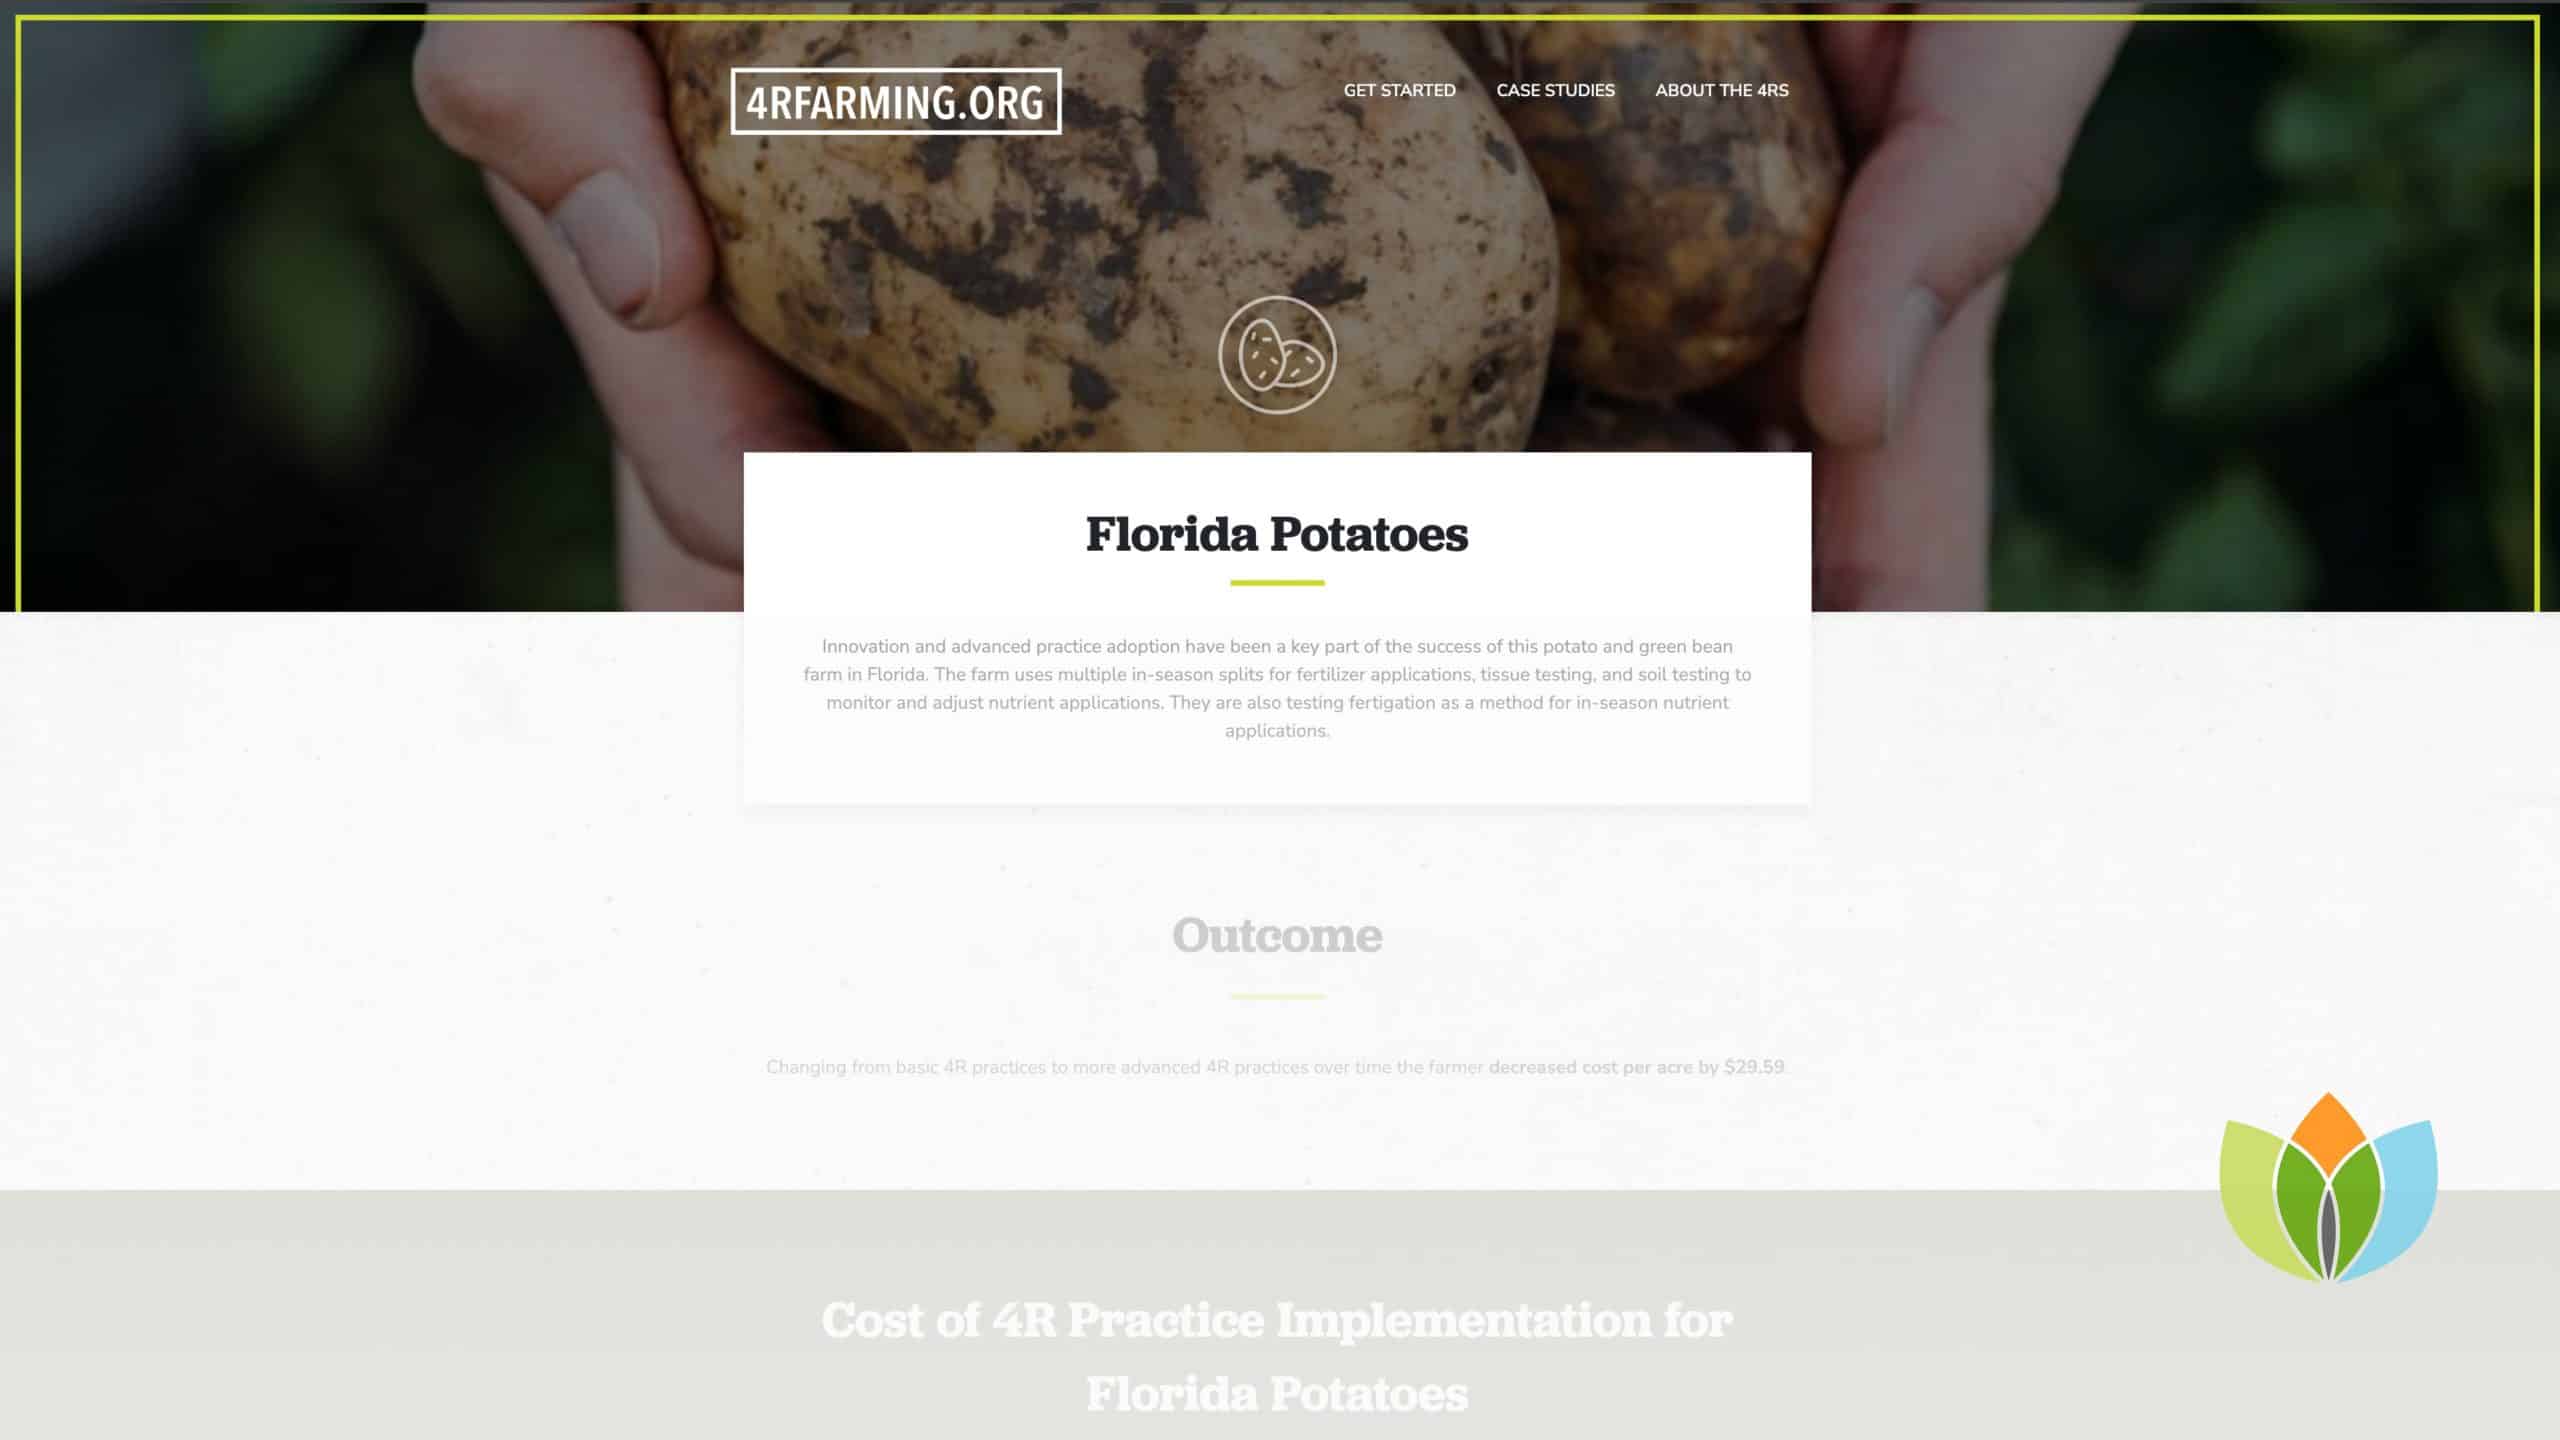 Innovation and advanced 4R practices lead to success on Florida potato farm